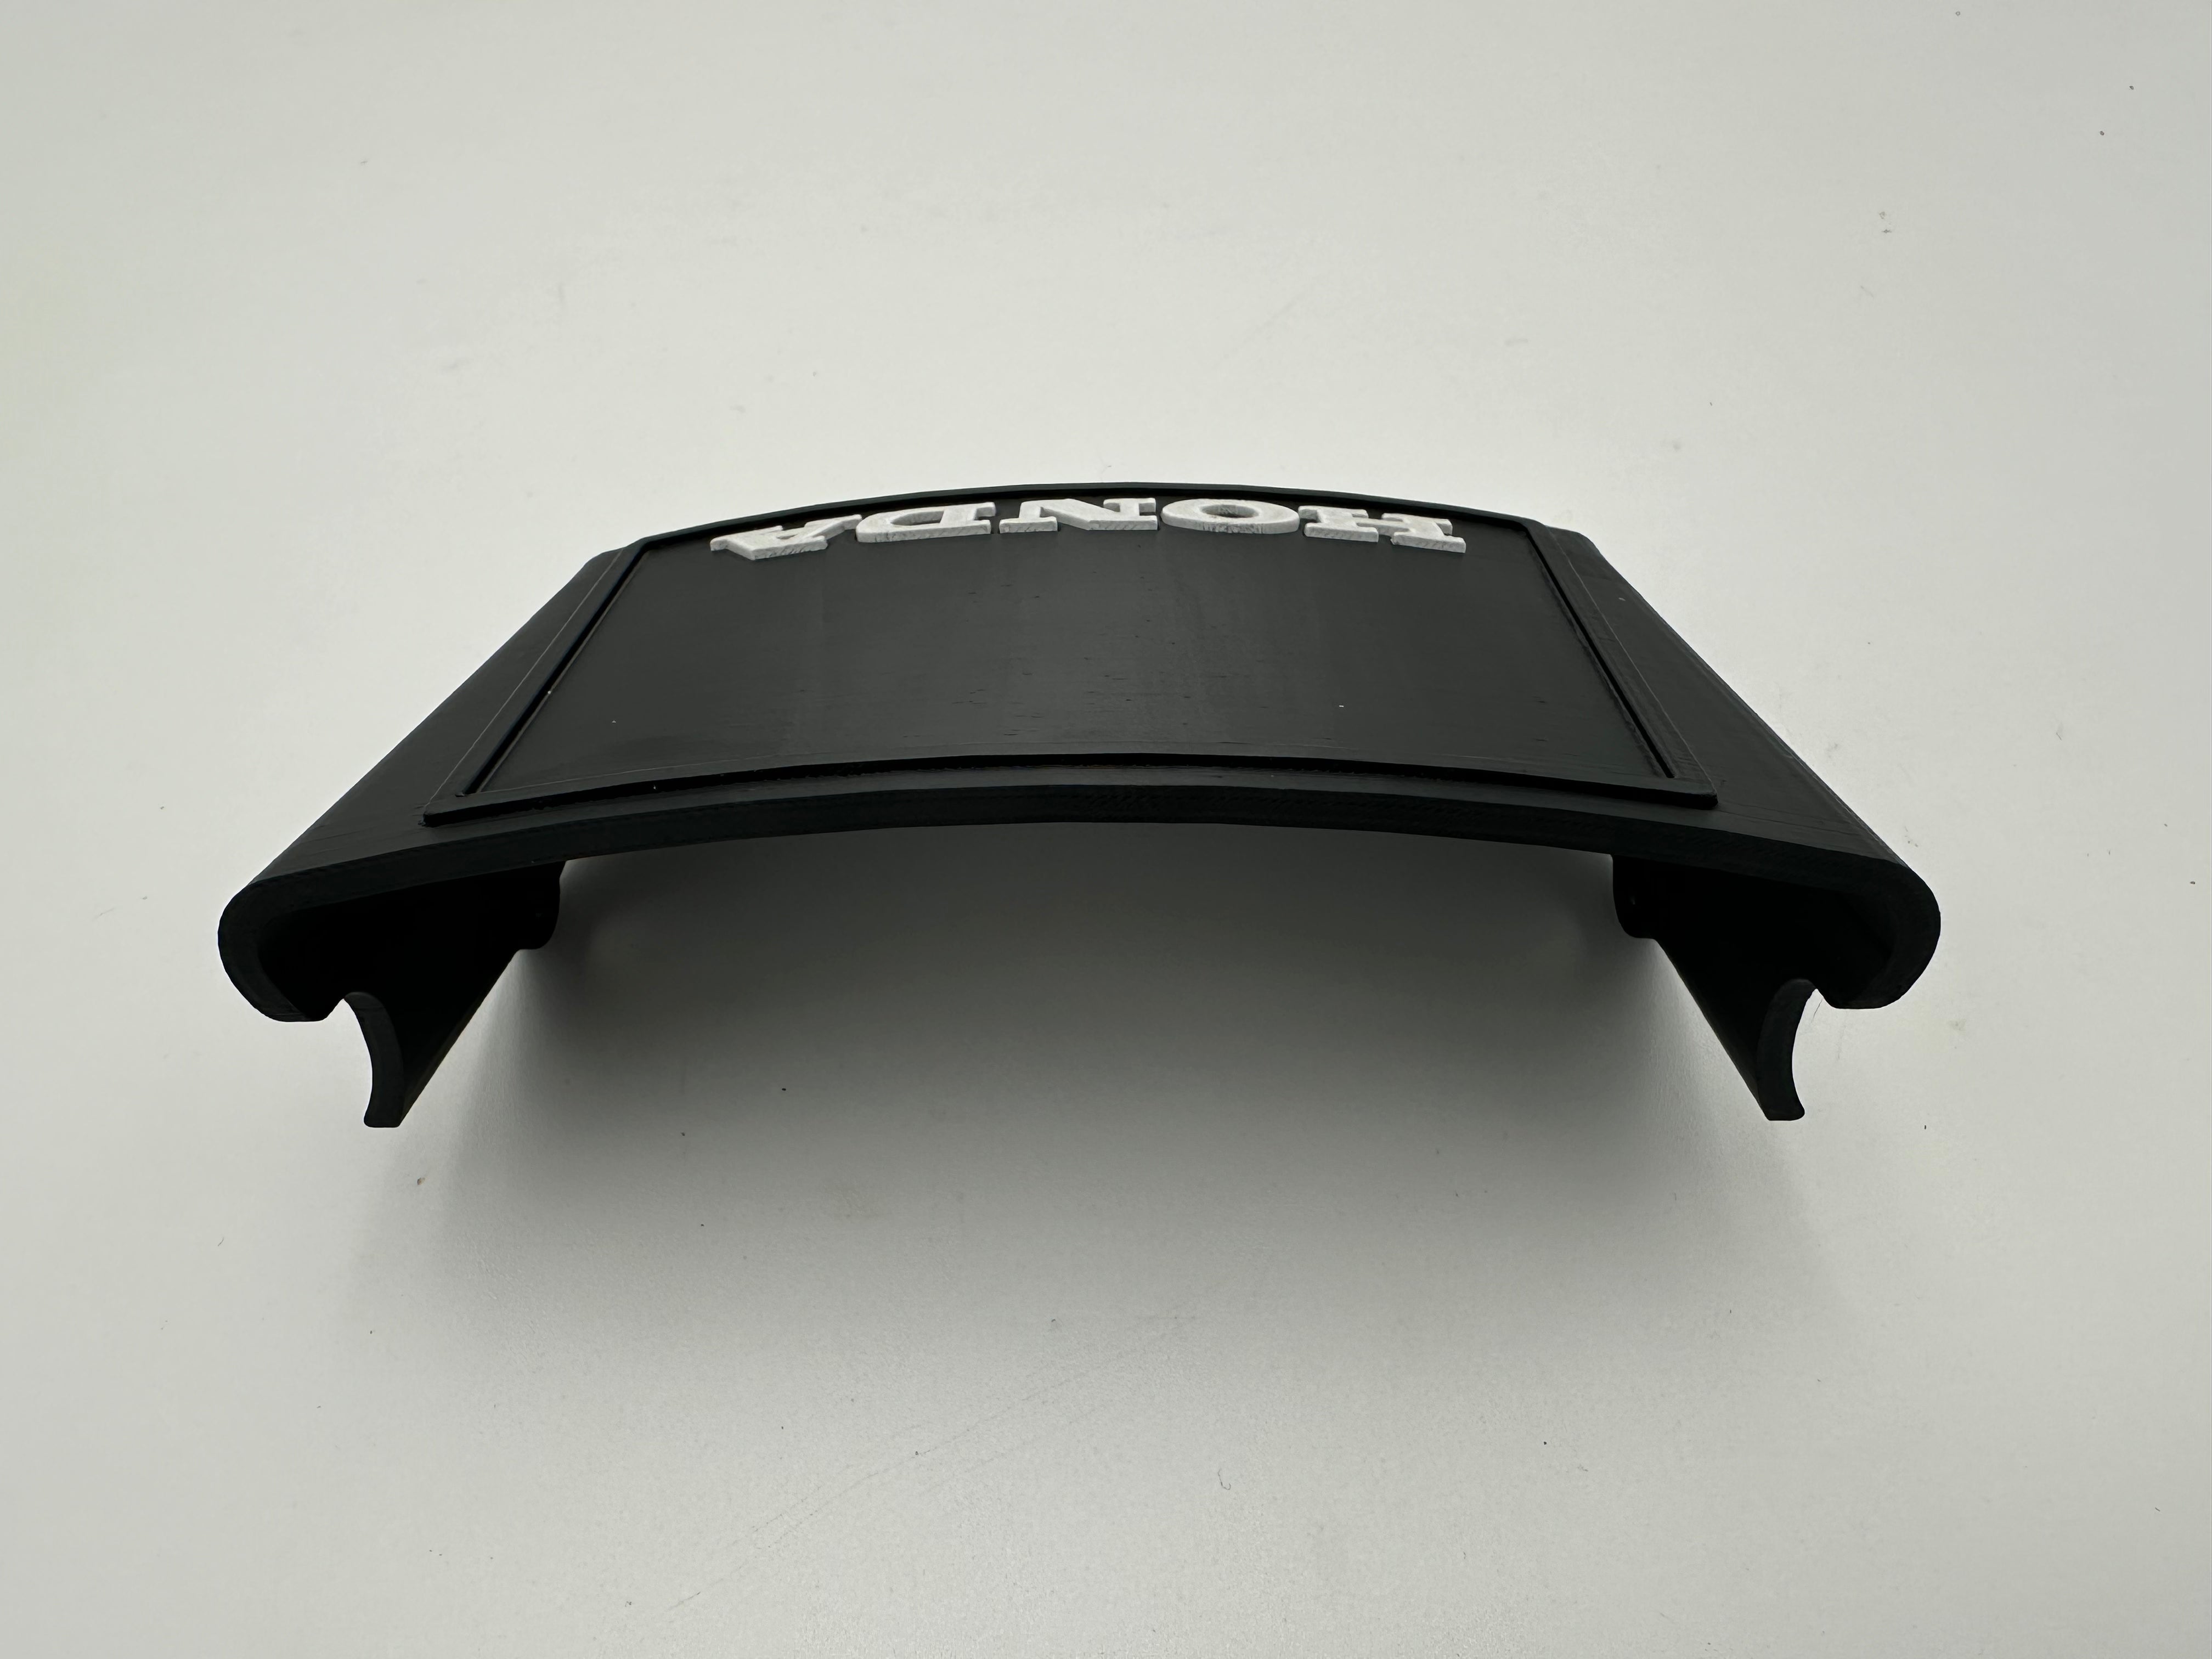 1978-1985 Honda ATC 70 3D Printed Black and White Front Number Plate